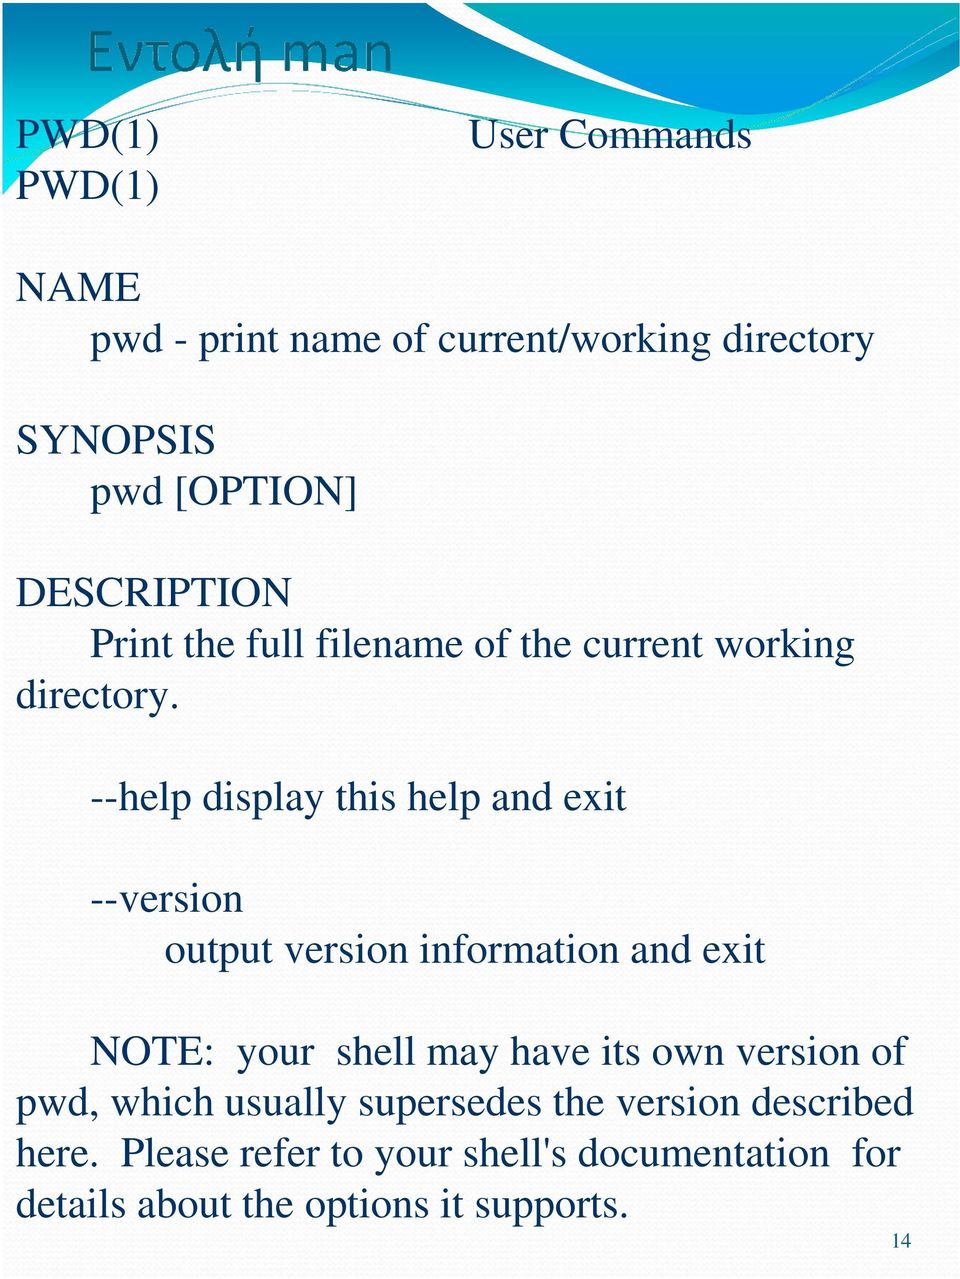 --help display this help and exit --version output version information and exit NOTE: your shell may have its